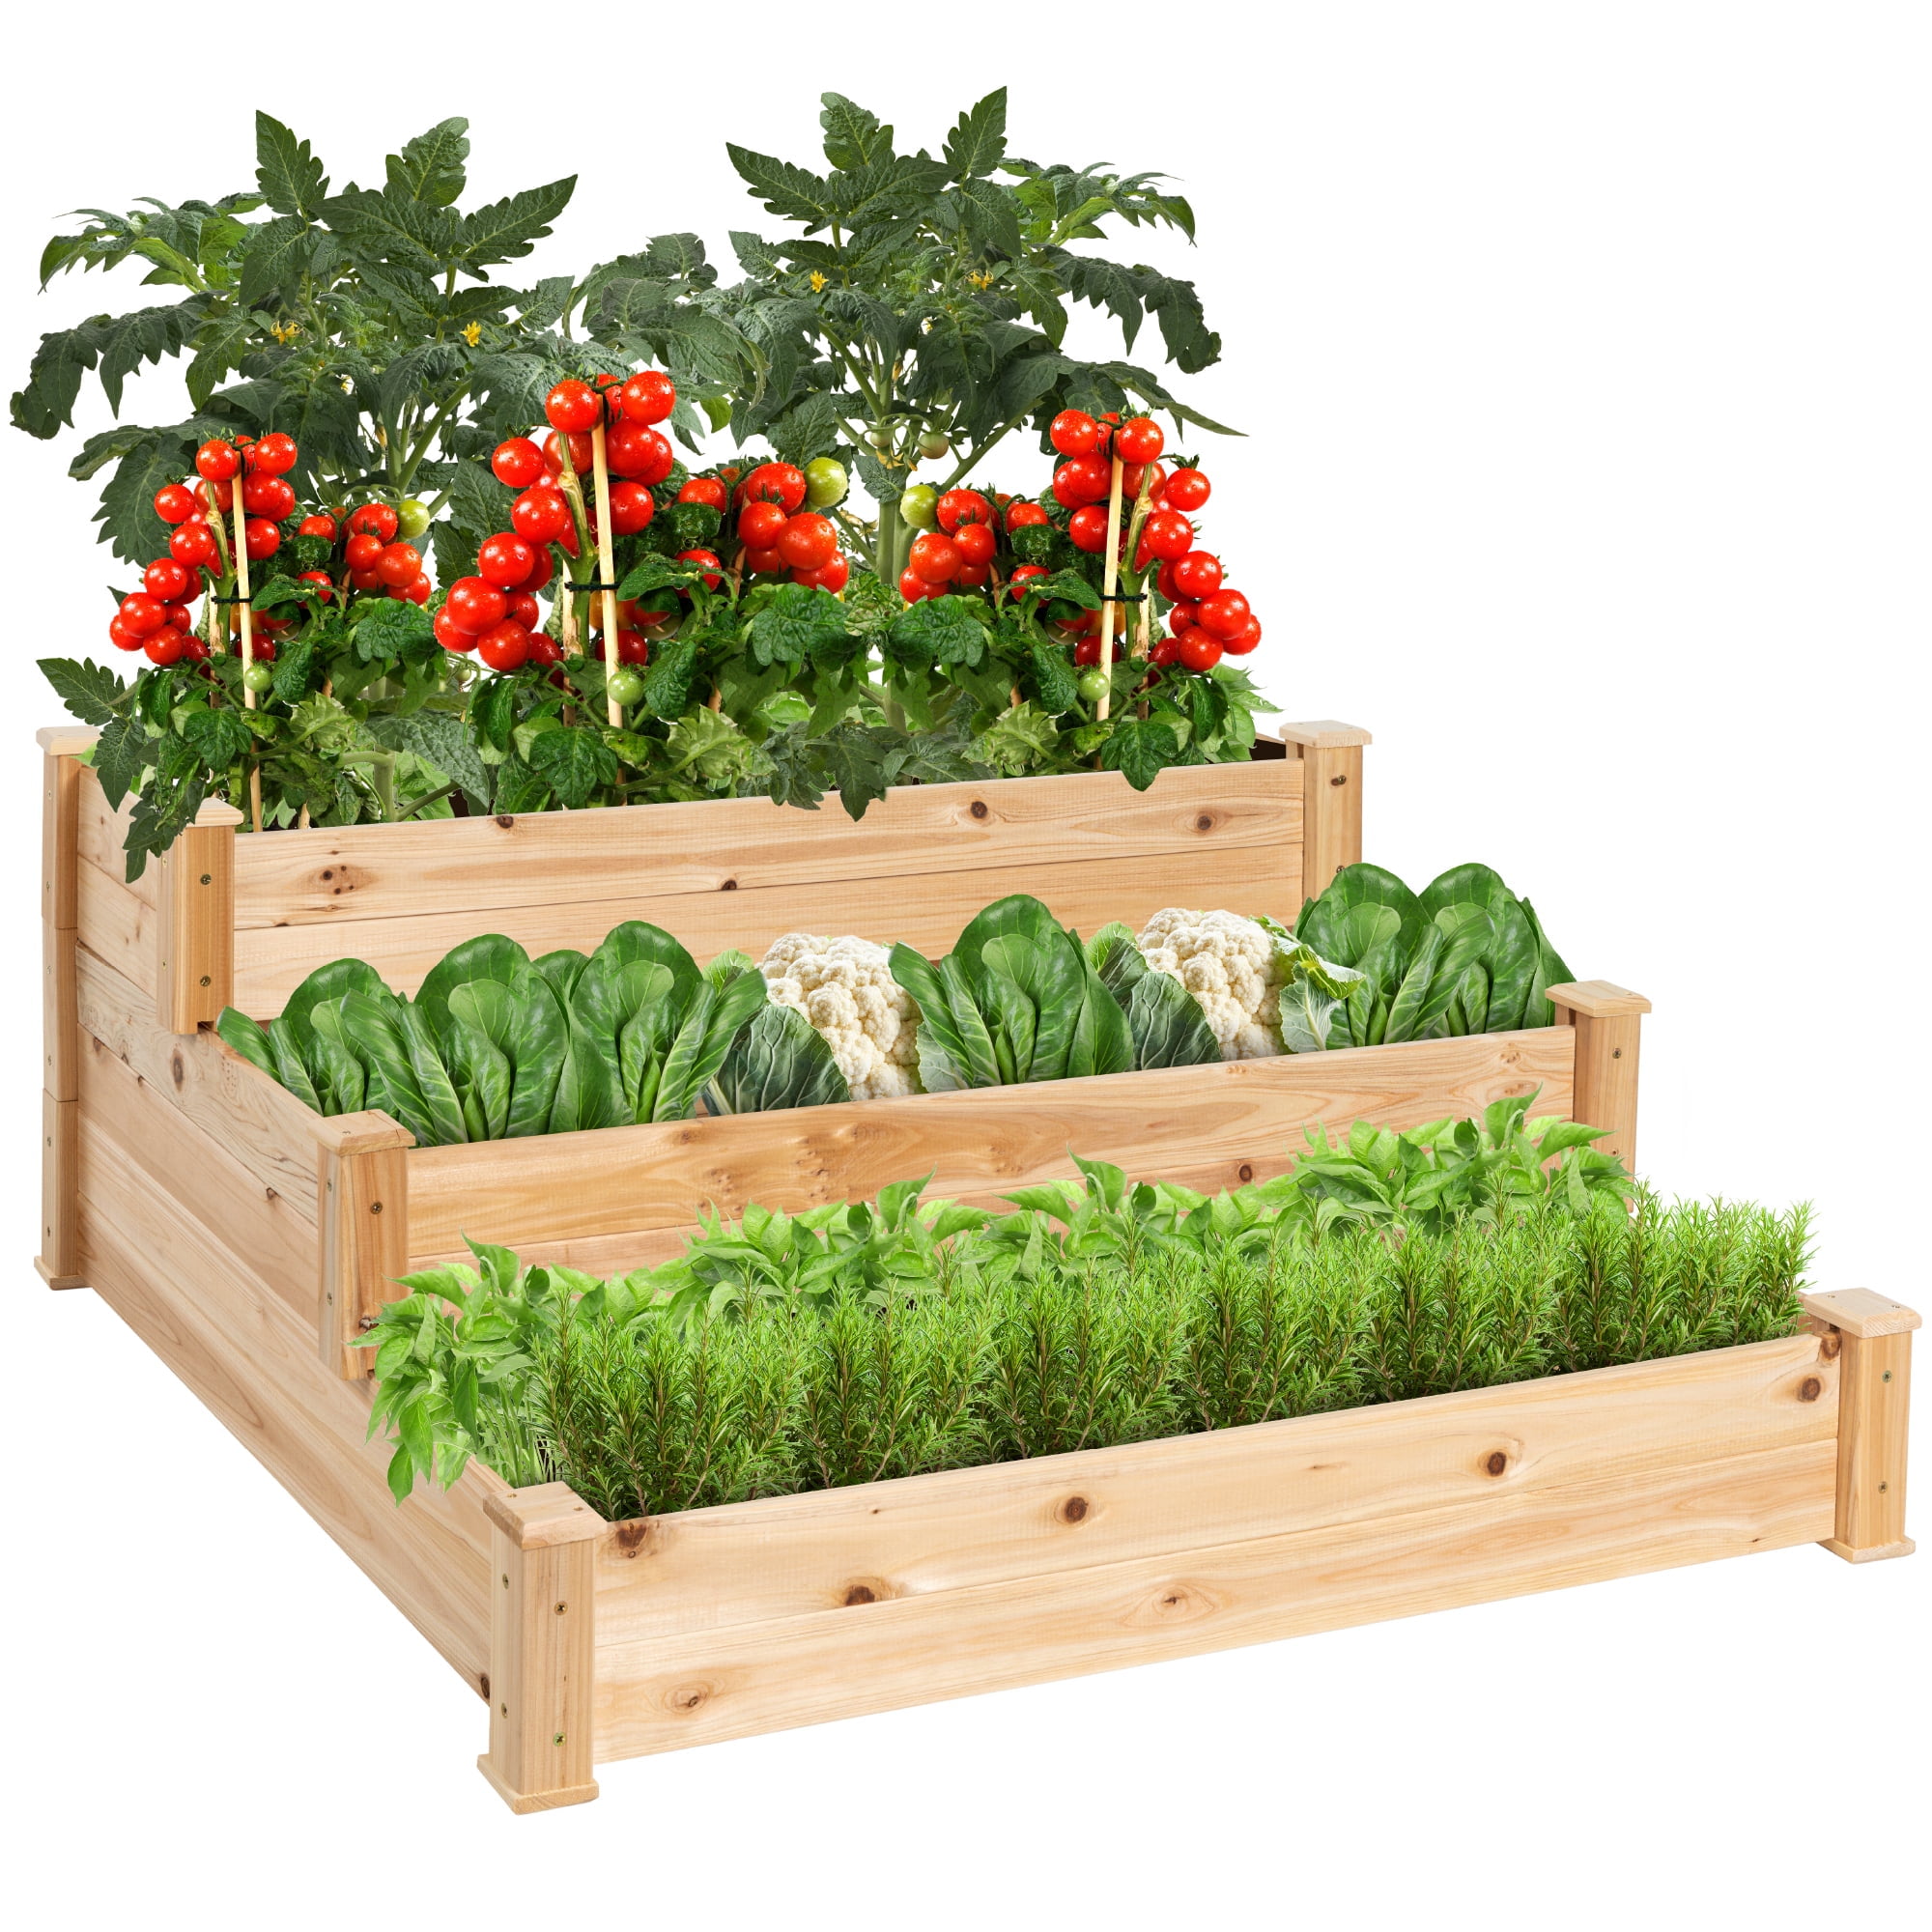 Best Choice Products 3-Tier Fir Wood Raised Garden Bed Planter Kit for  Plants, Vegetables, Outdoor Gardening - Natural - Walmart.com